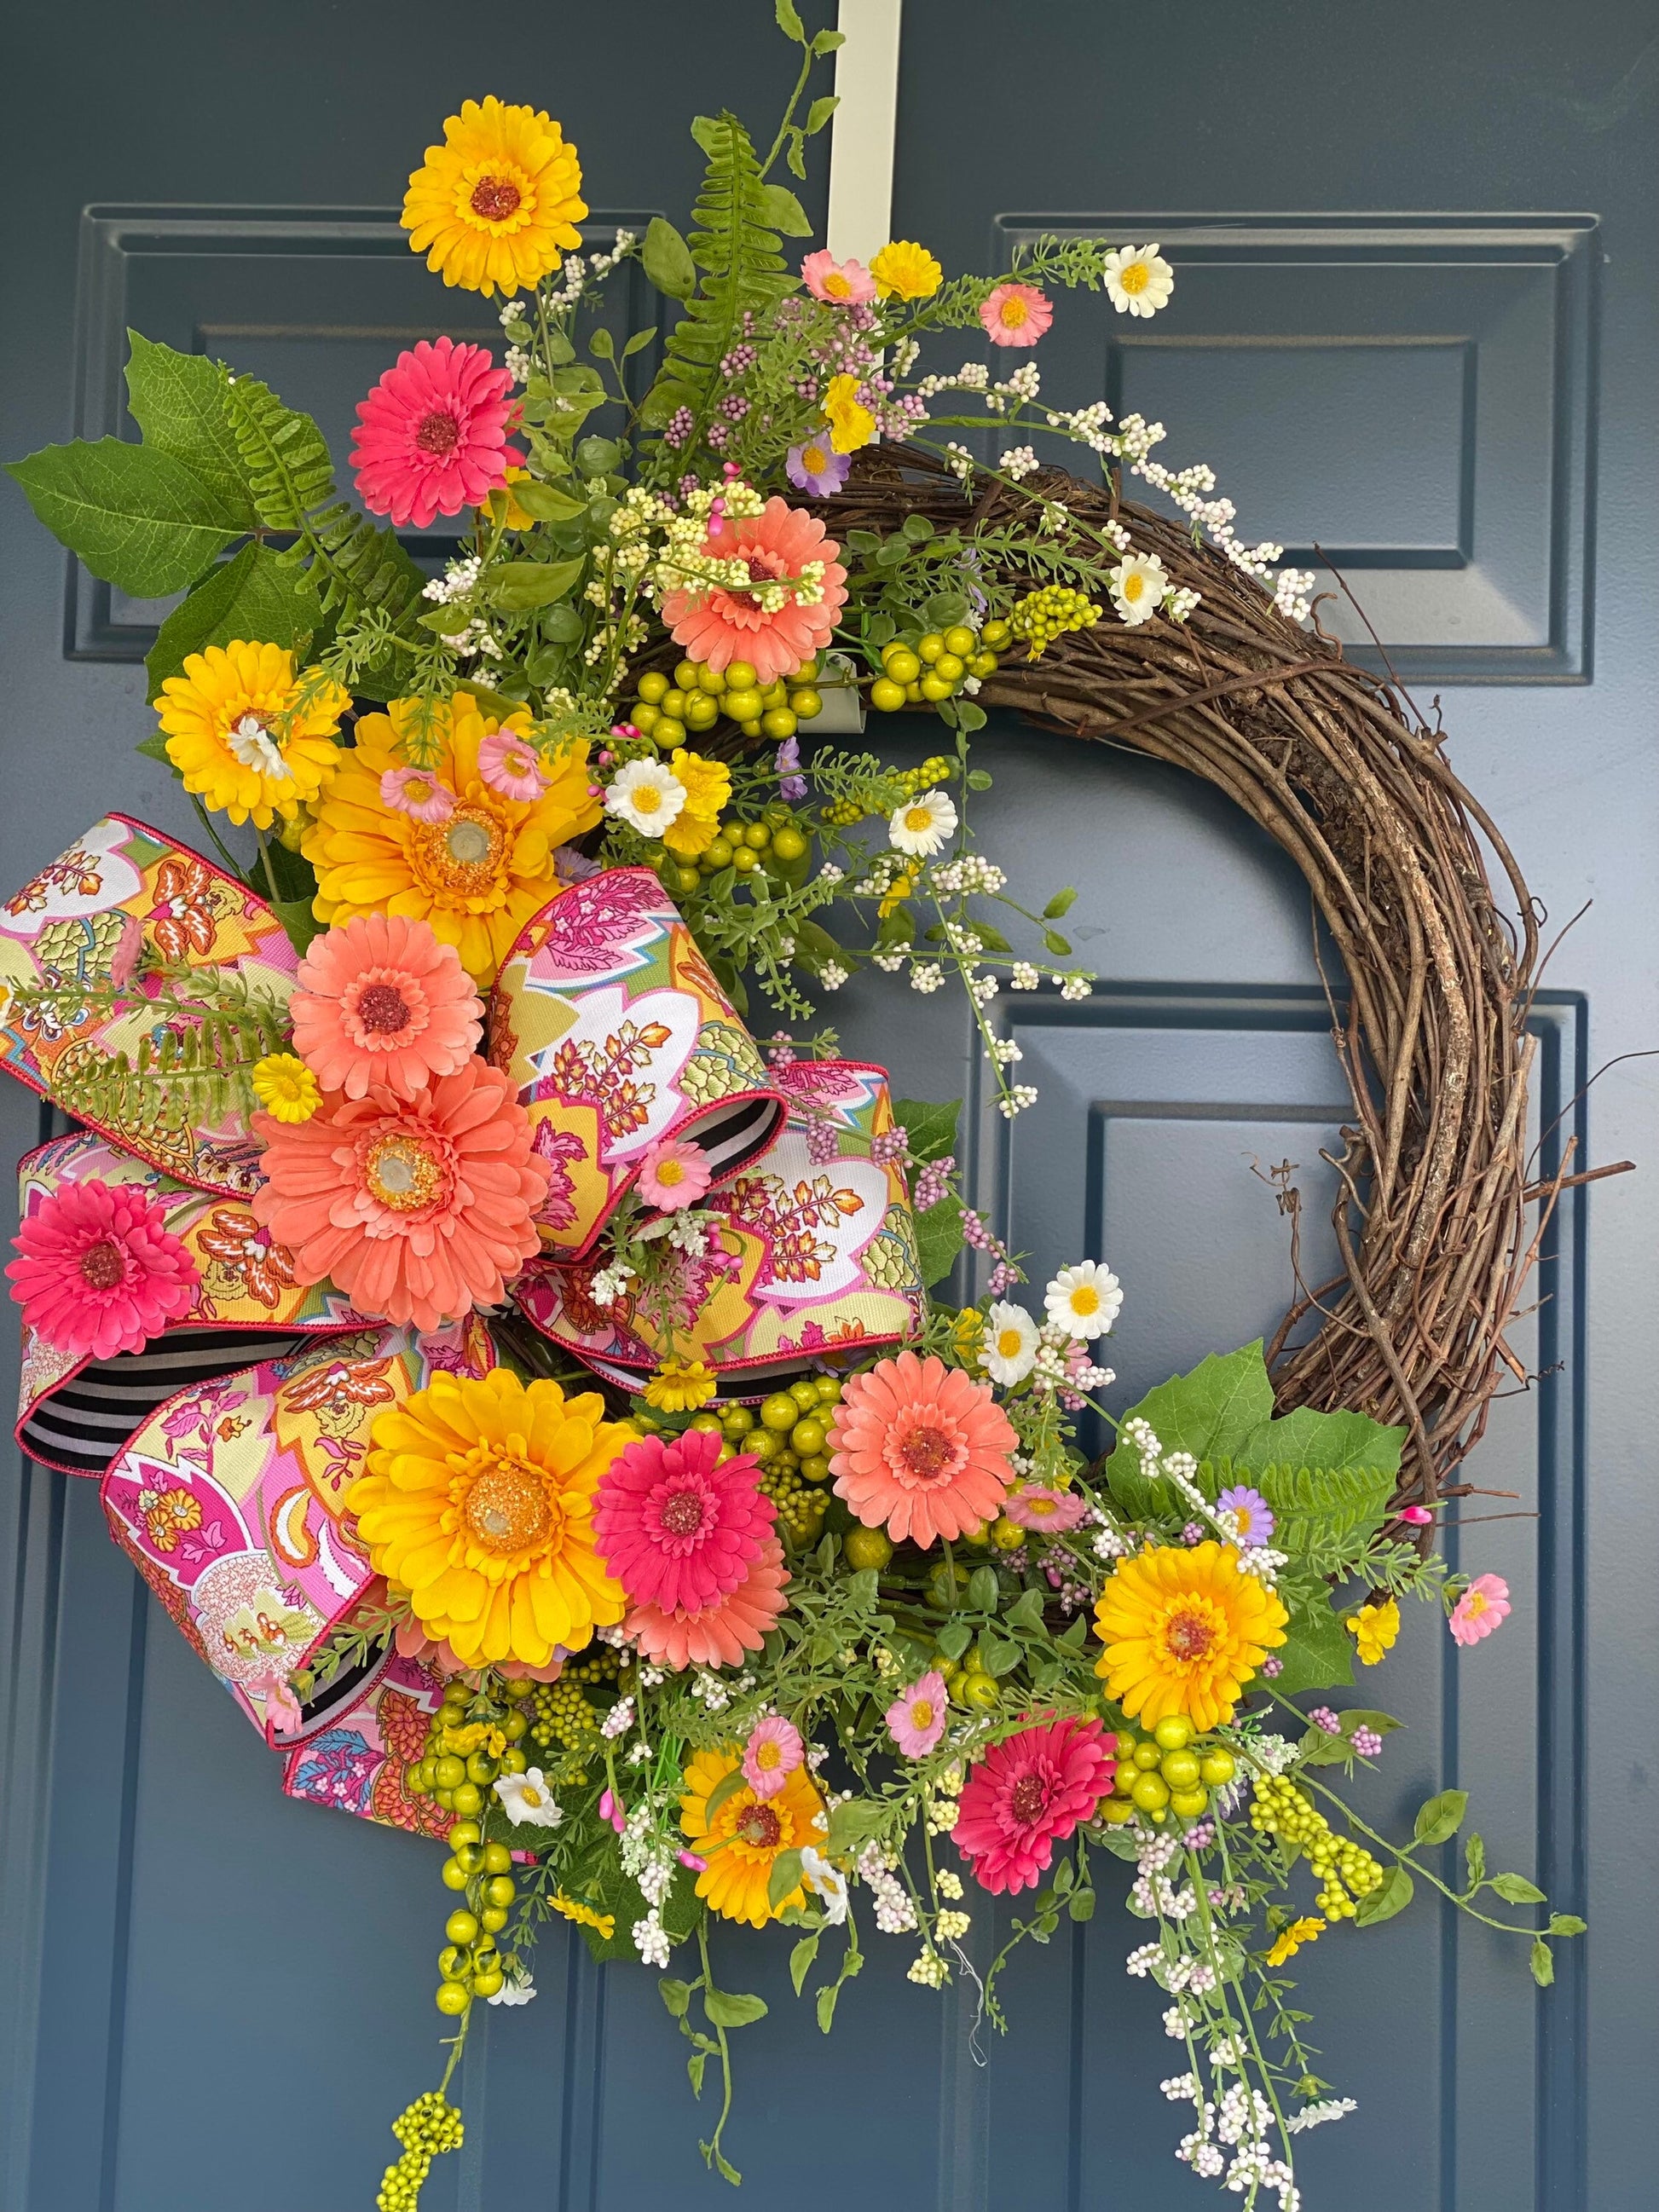 Bright Summer Wreath for Front Door, Gerbera Daisy and Wildflower Wreath, Colorful Porch Decor, Floral Grapevine Wreath for Spring Summer